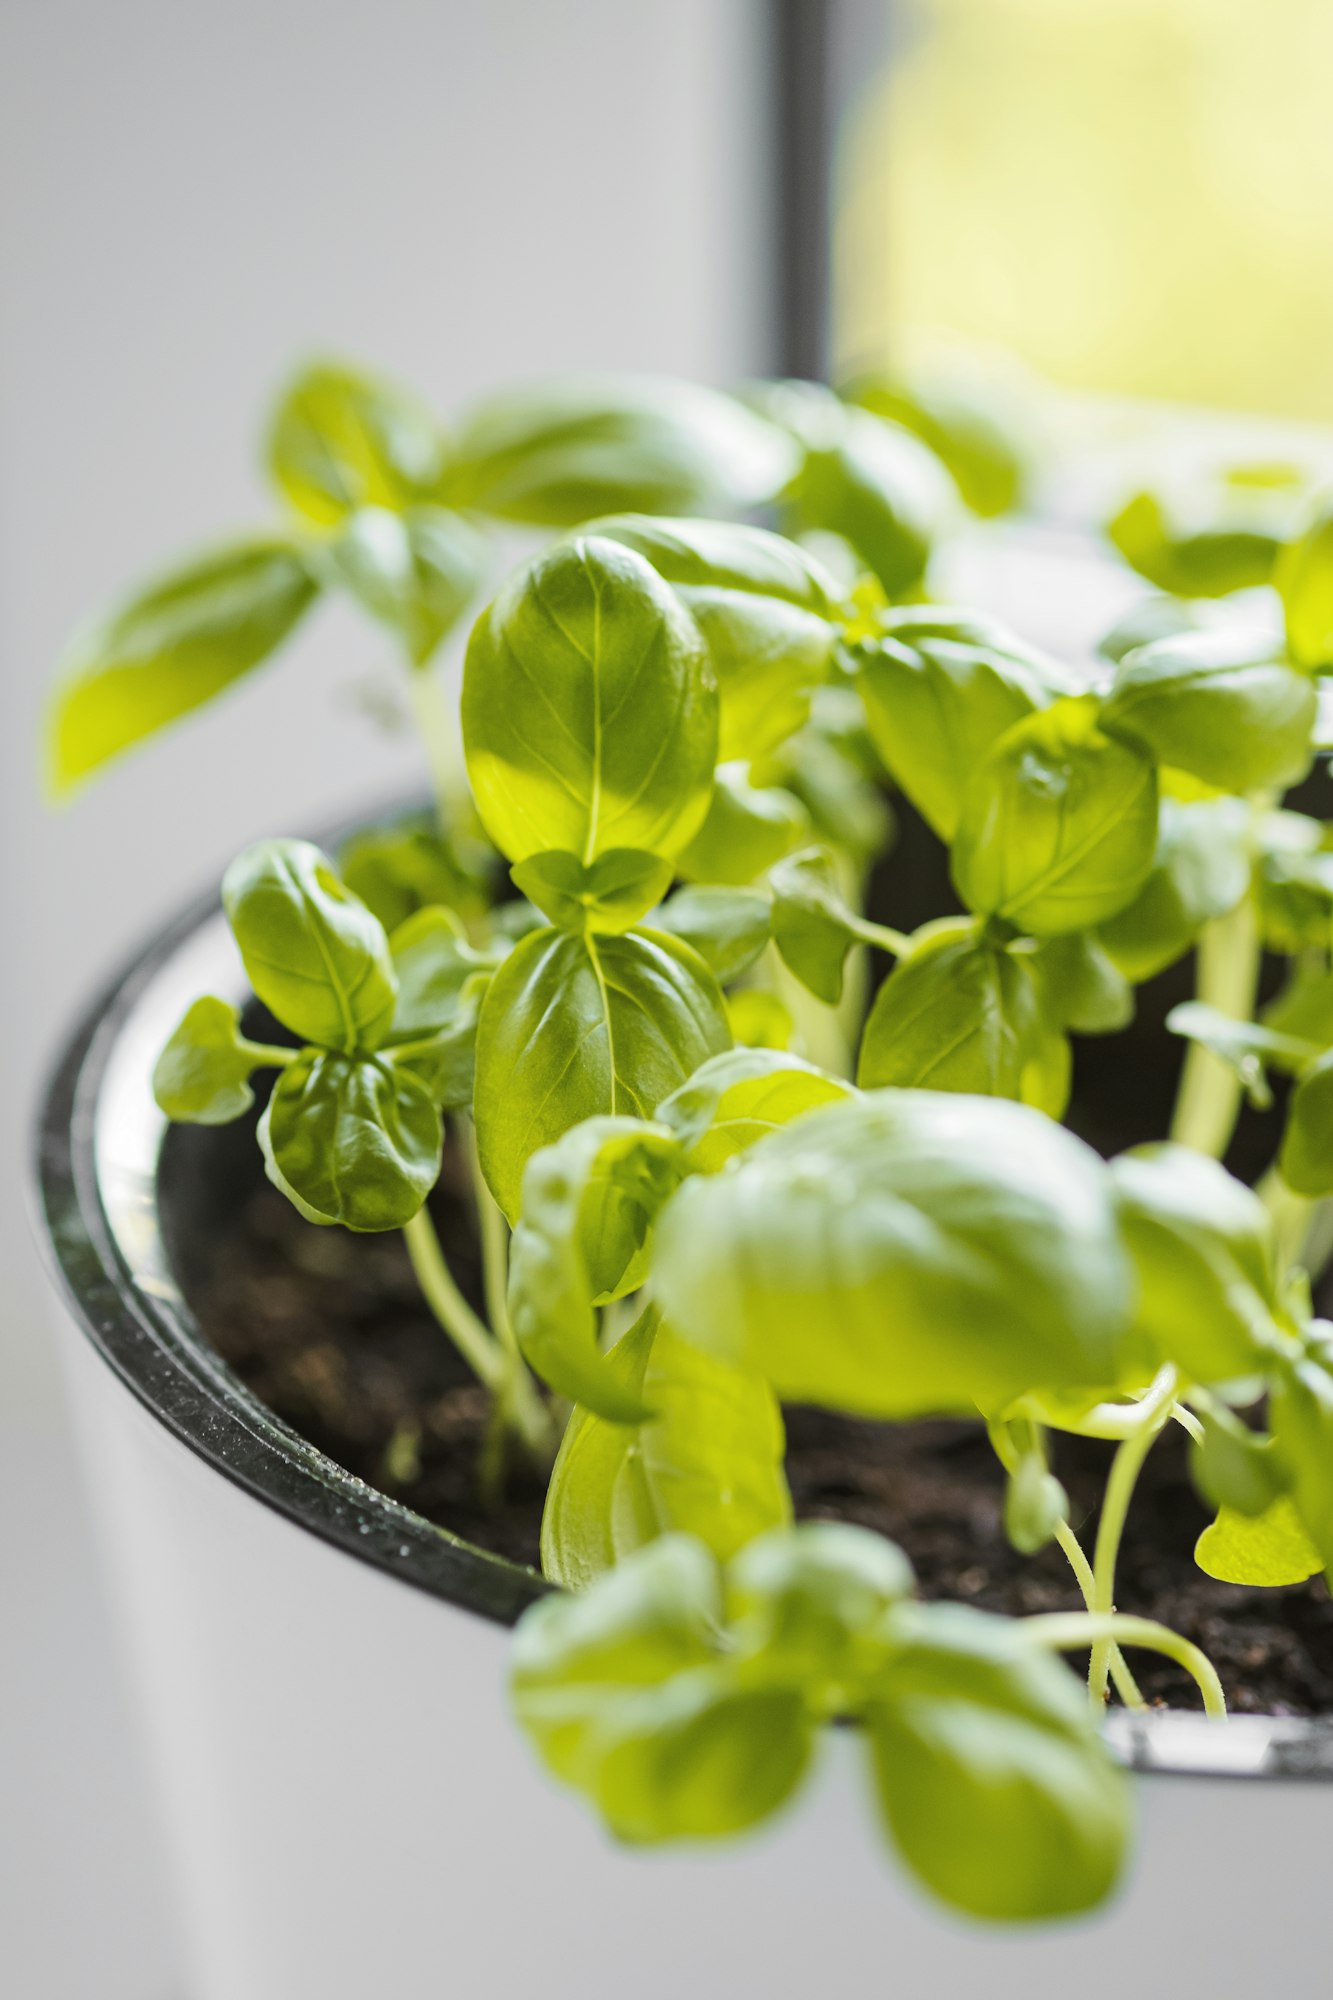 Planting Your Basil